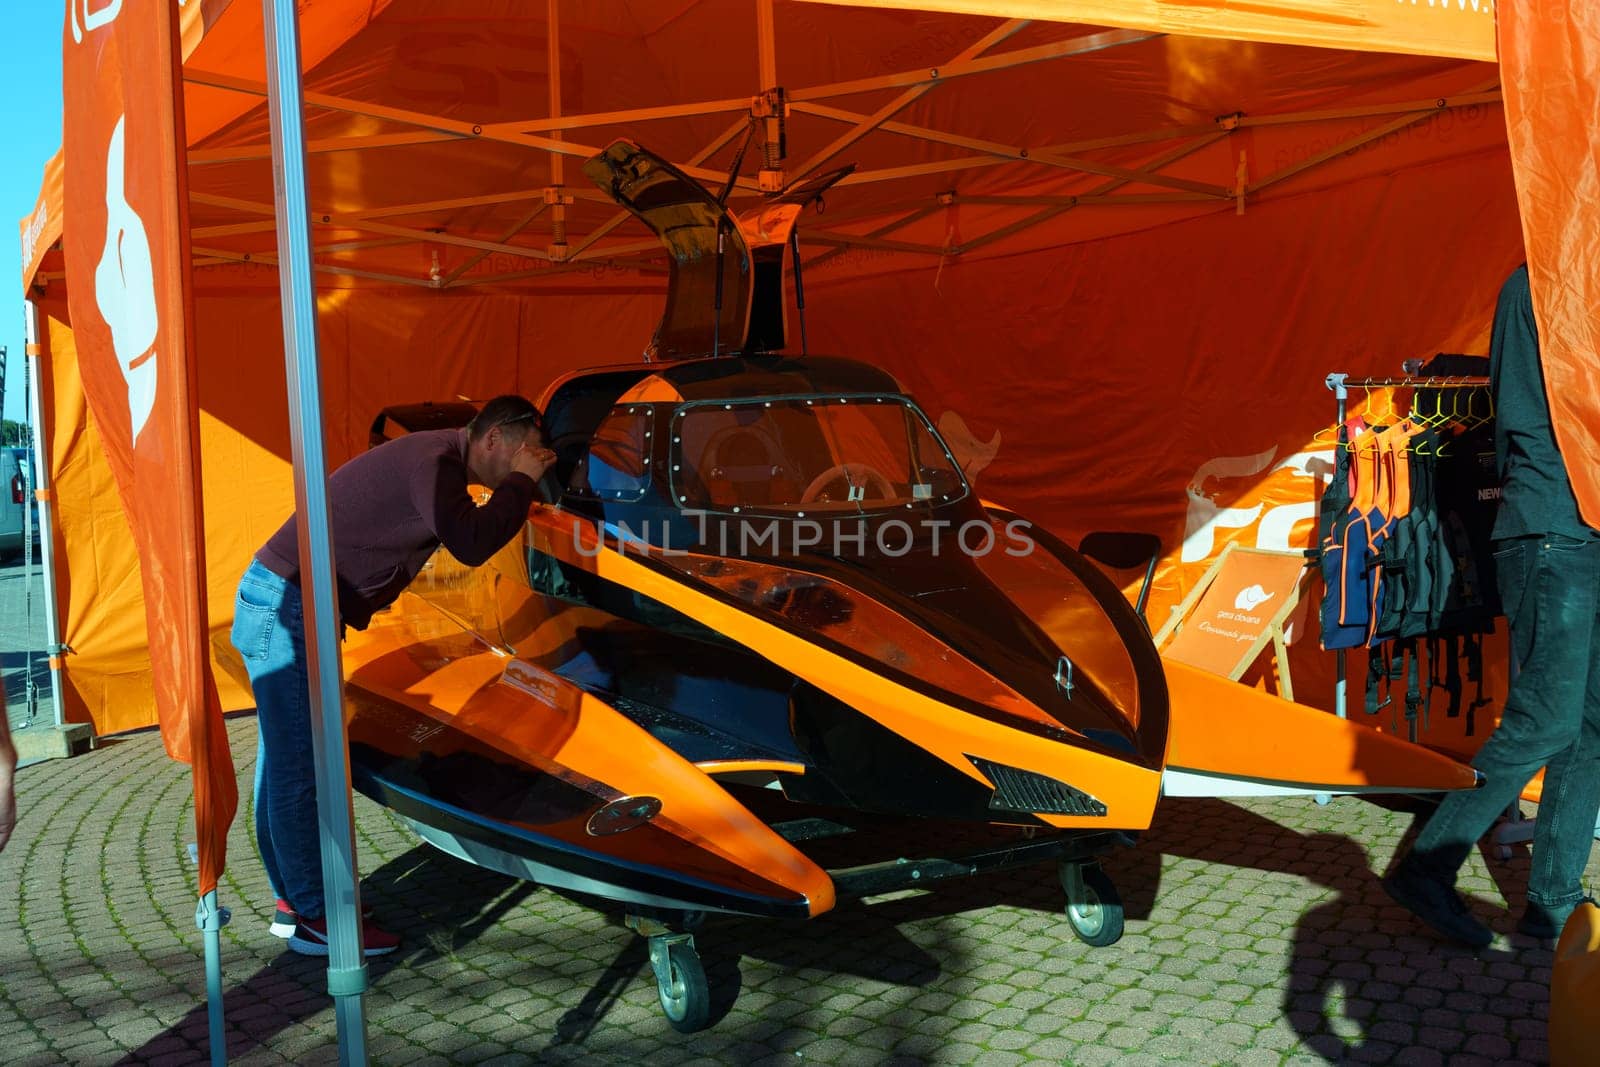 Klaipeda, Lithuania - August 11, 2023: A man in casual clothing standing next to a vibrant orange and black jet ski on a sandy beach.